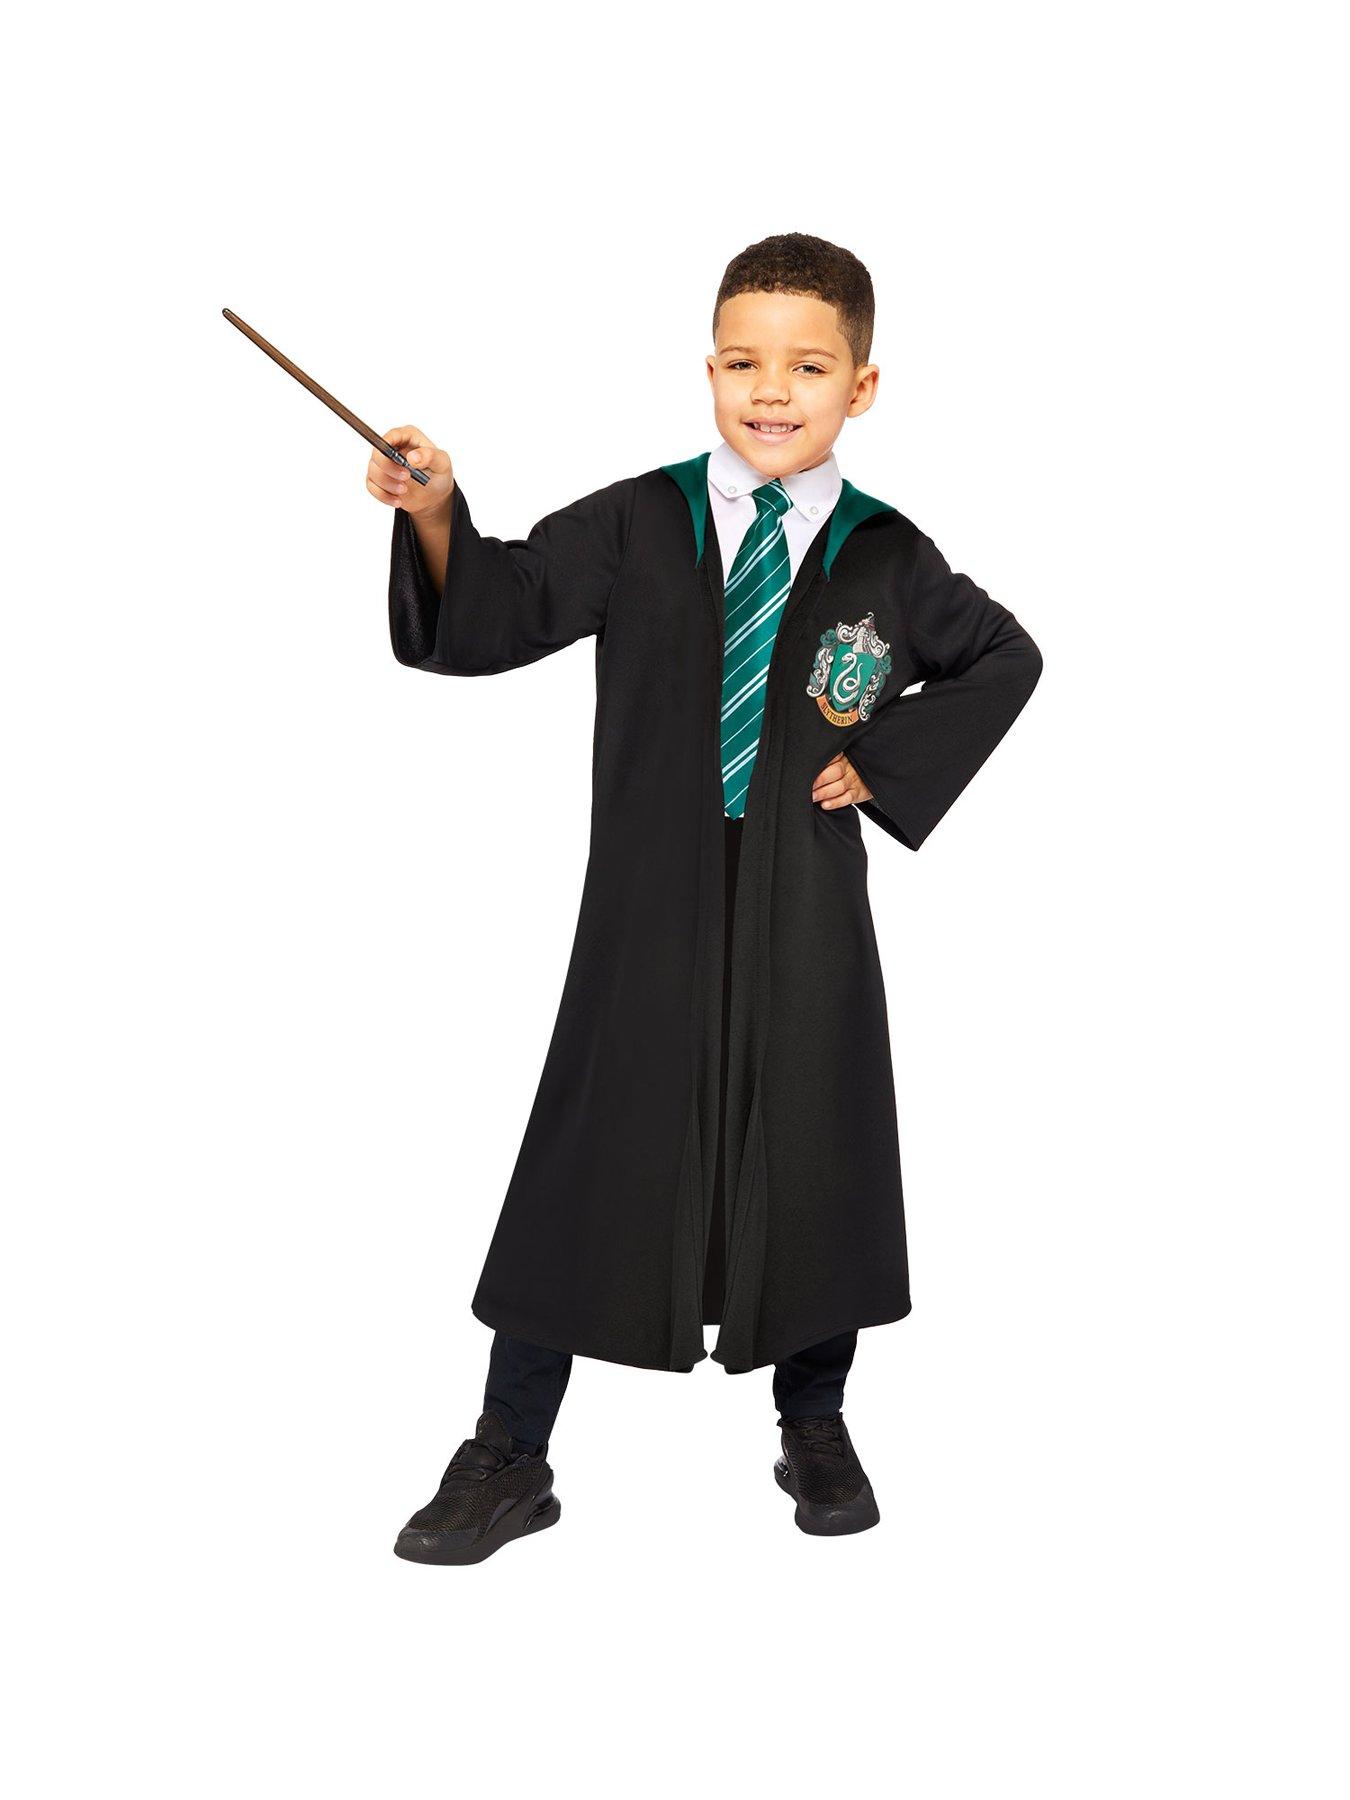 Slytherin House Robe for Stuffed Toys